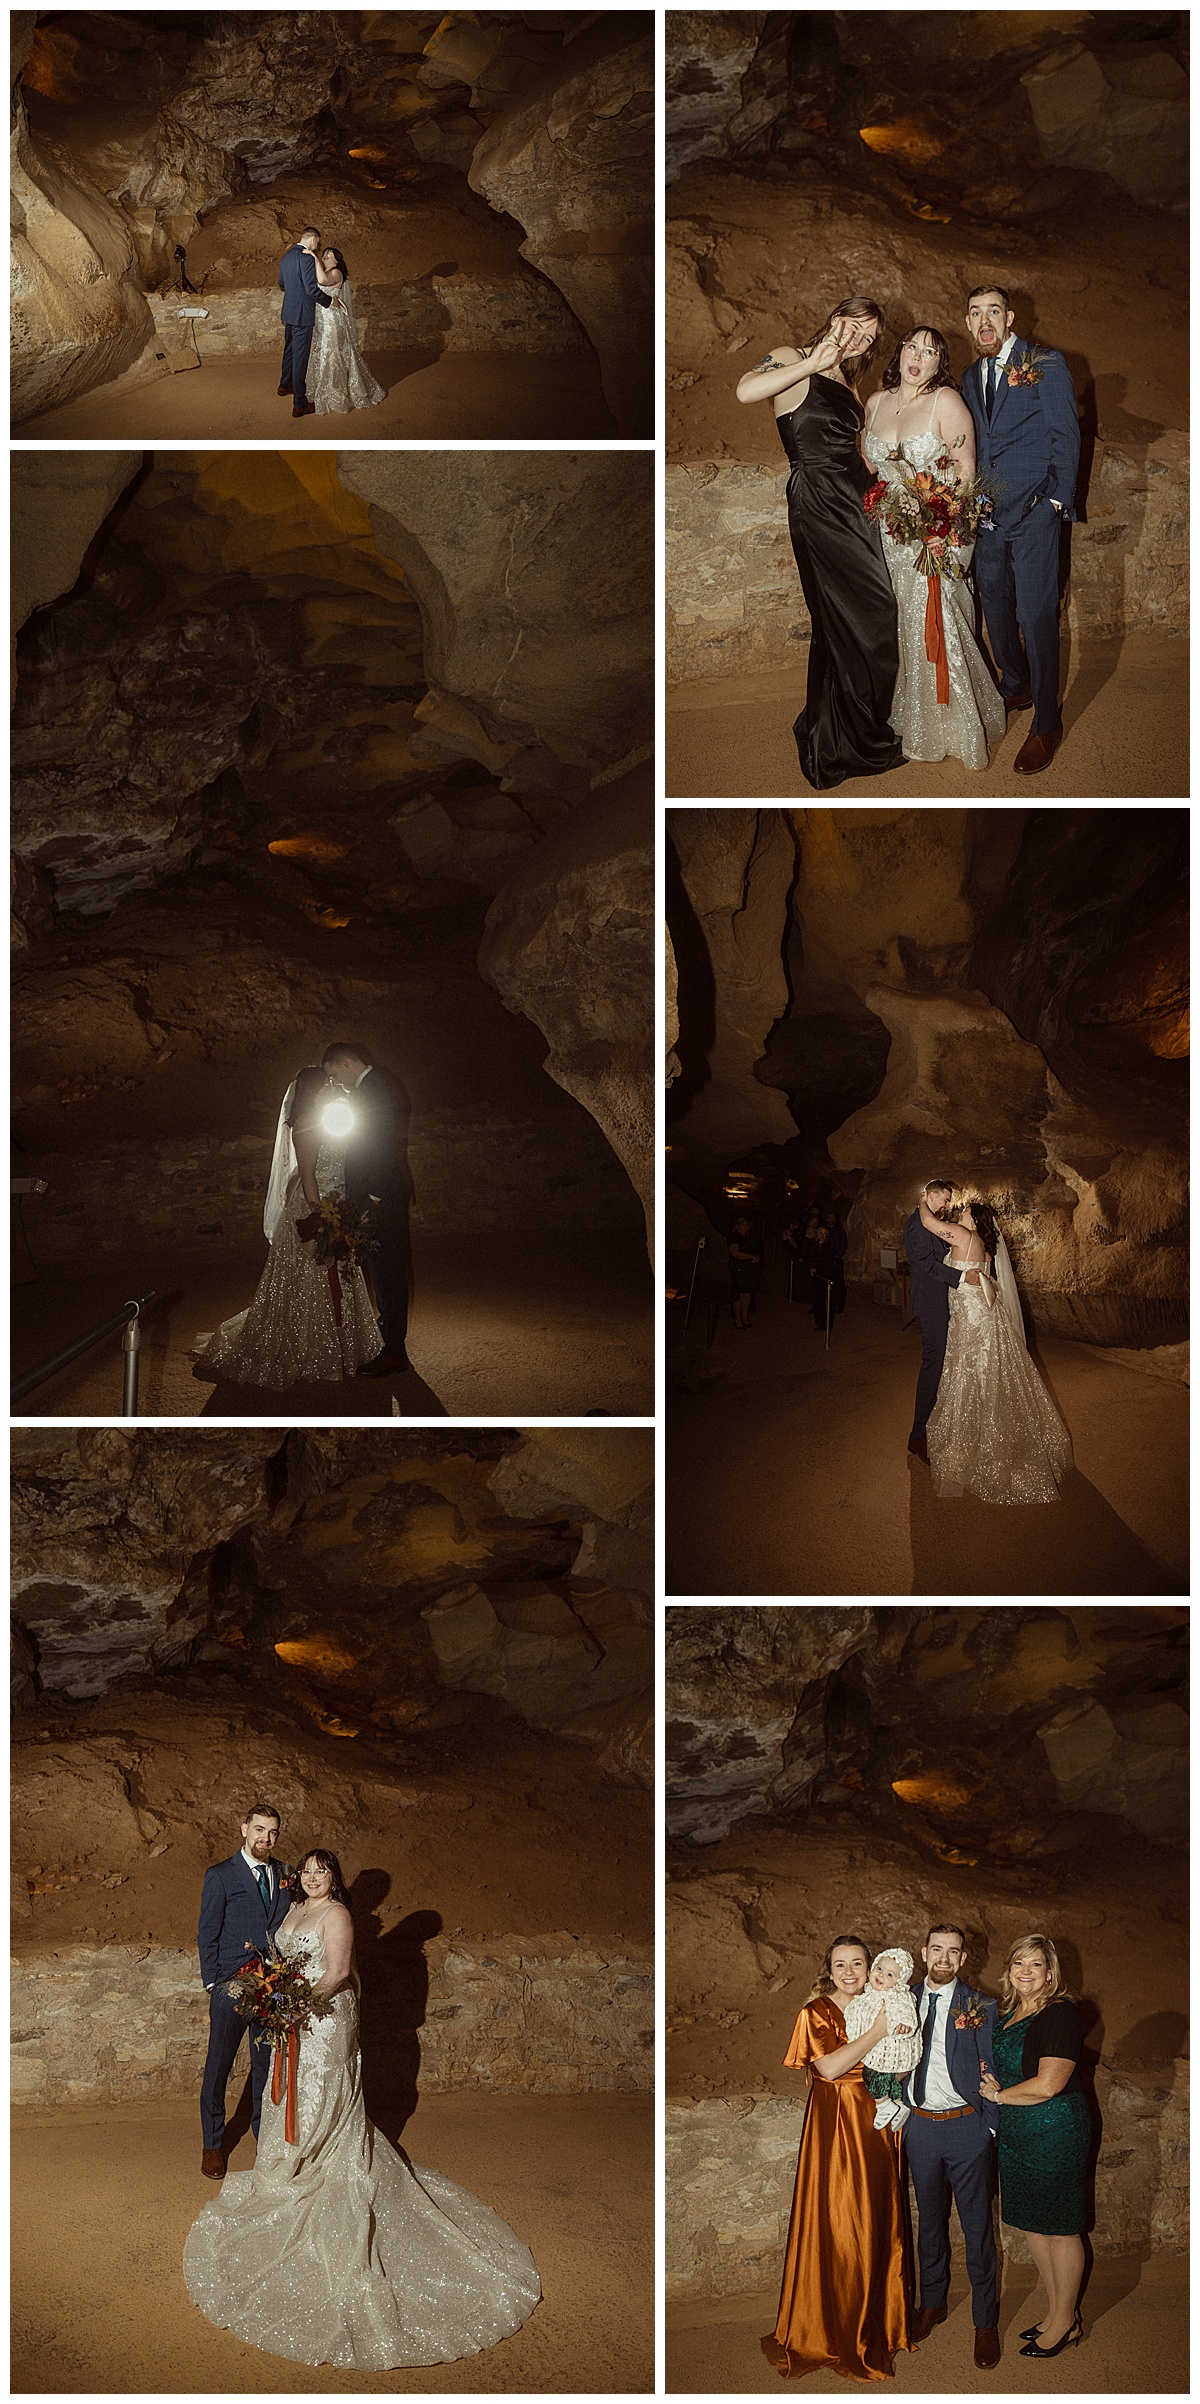 The couple shared a first dance as part of their cave elopement.